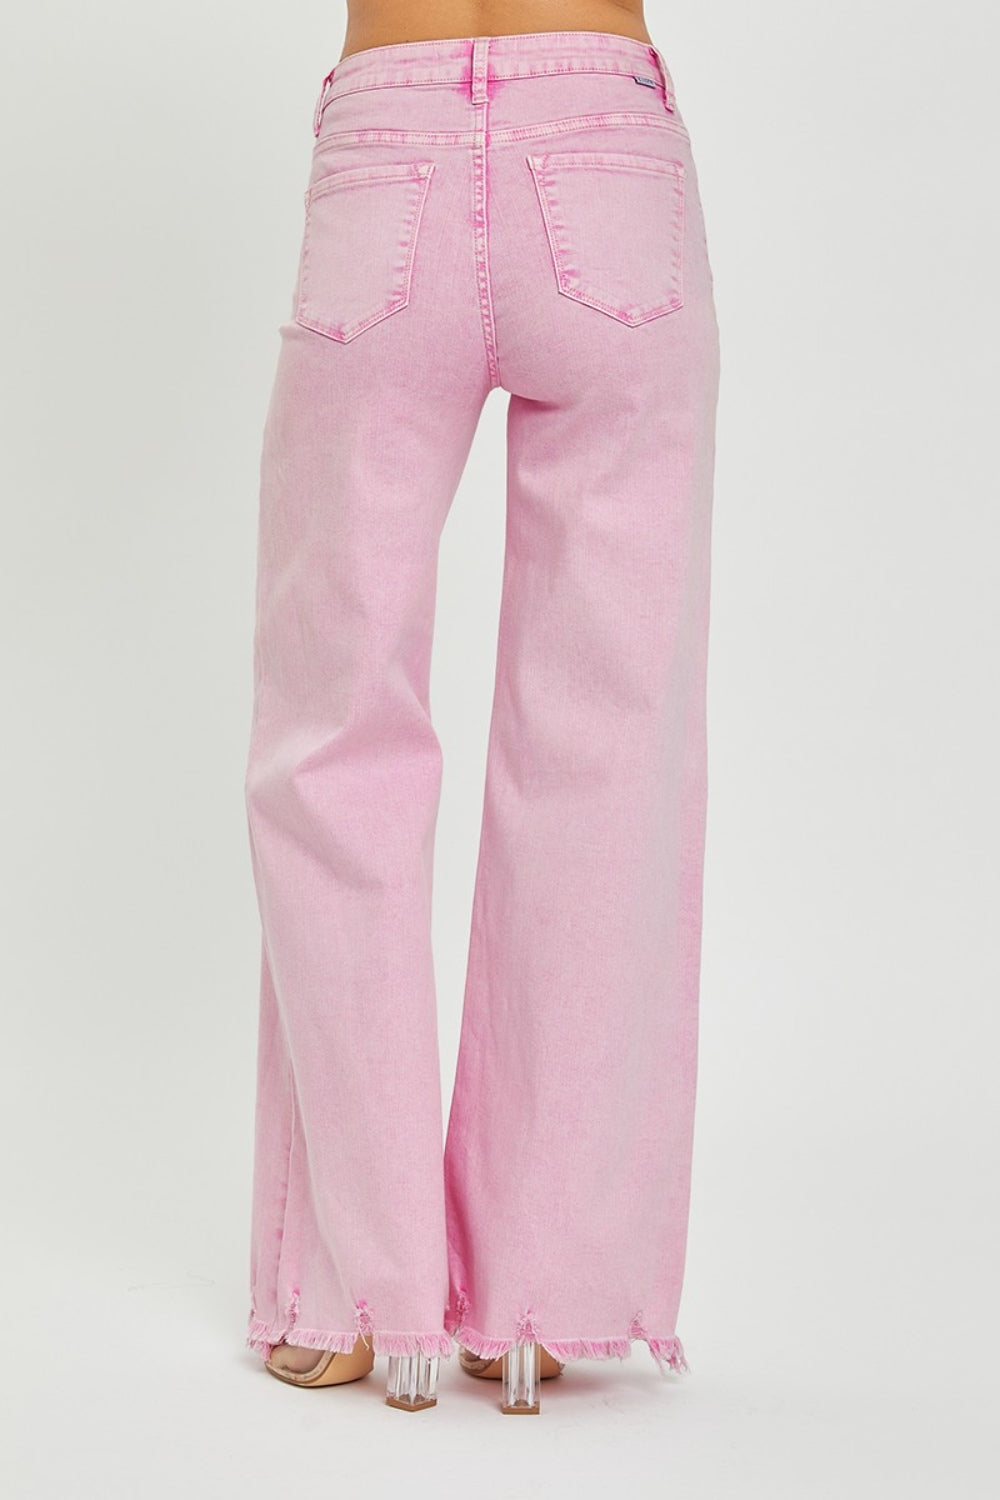 RISEN High Rise Wide Leg Jeans-Denim-Inspired by Justeen-Women's Clothing Boutique in Chicago, Illinois